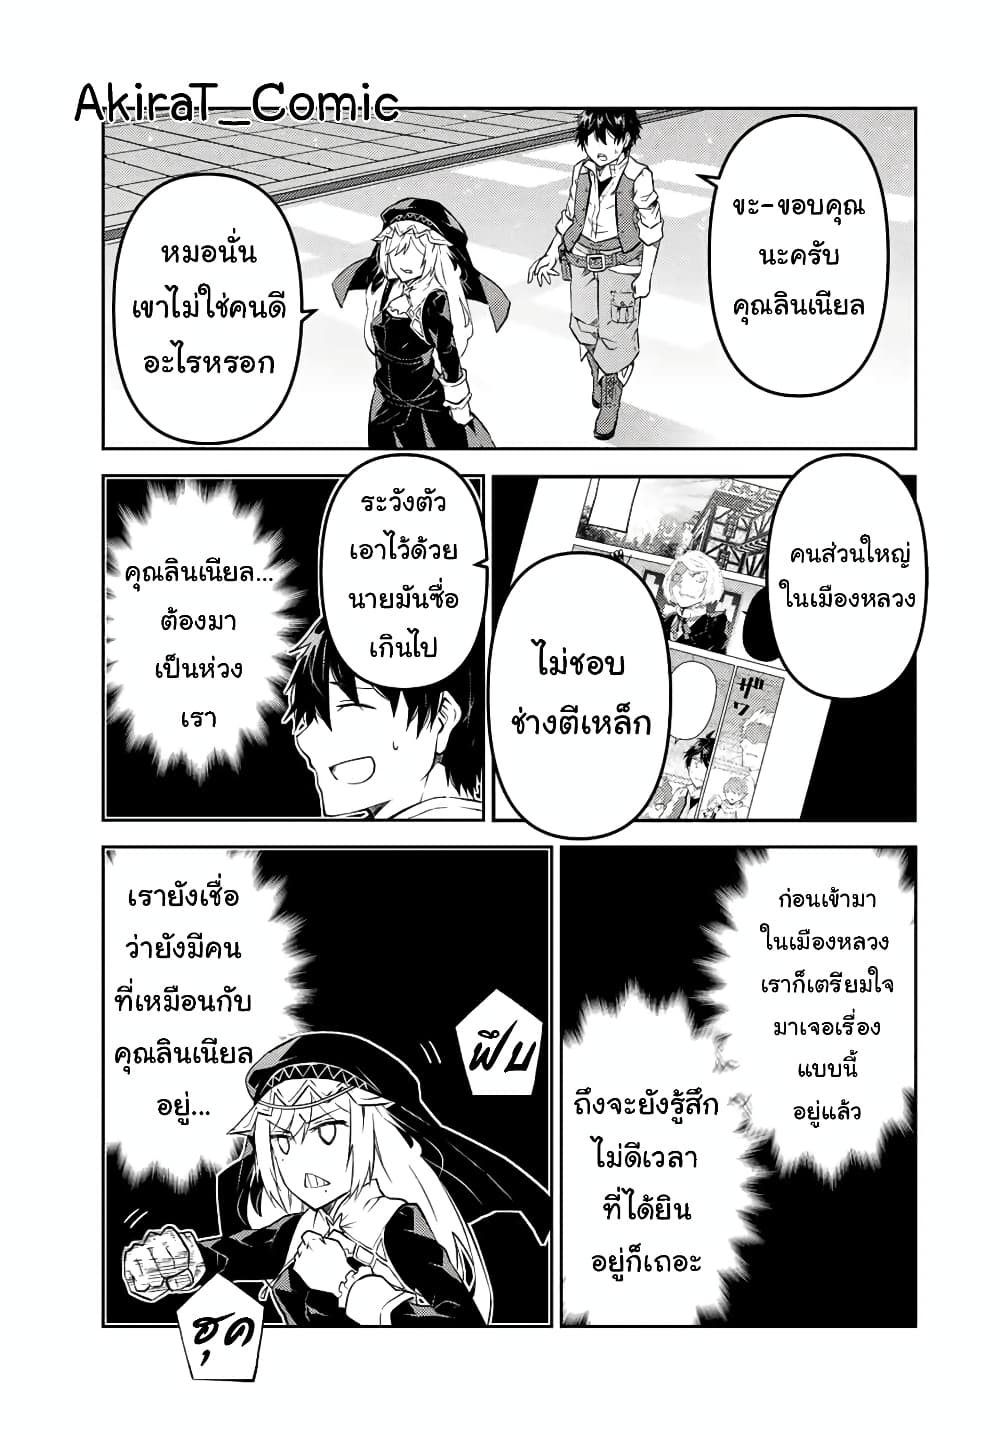 The Weakest Occupation "Blacksmith", but It's Actually the Strongest ช่างตีเหล็กอาชีพกระจอก? 94-94